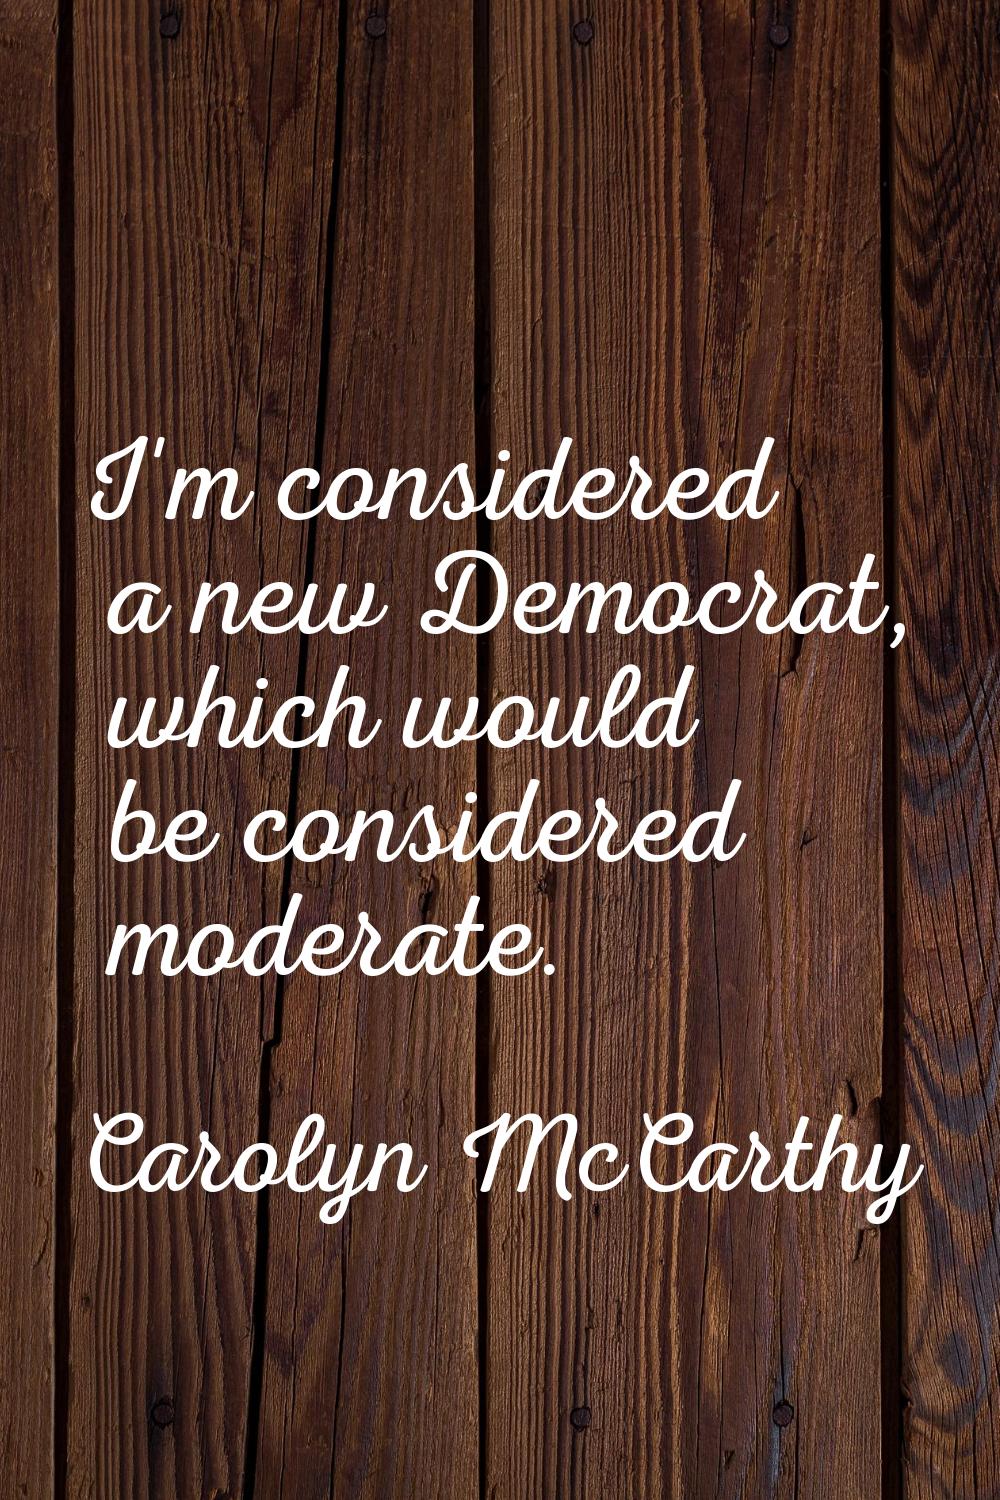 I'm considered a new Democrat, which would be considered moderate.